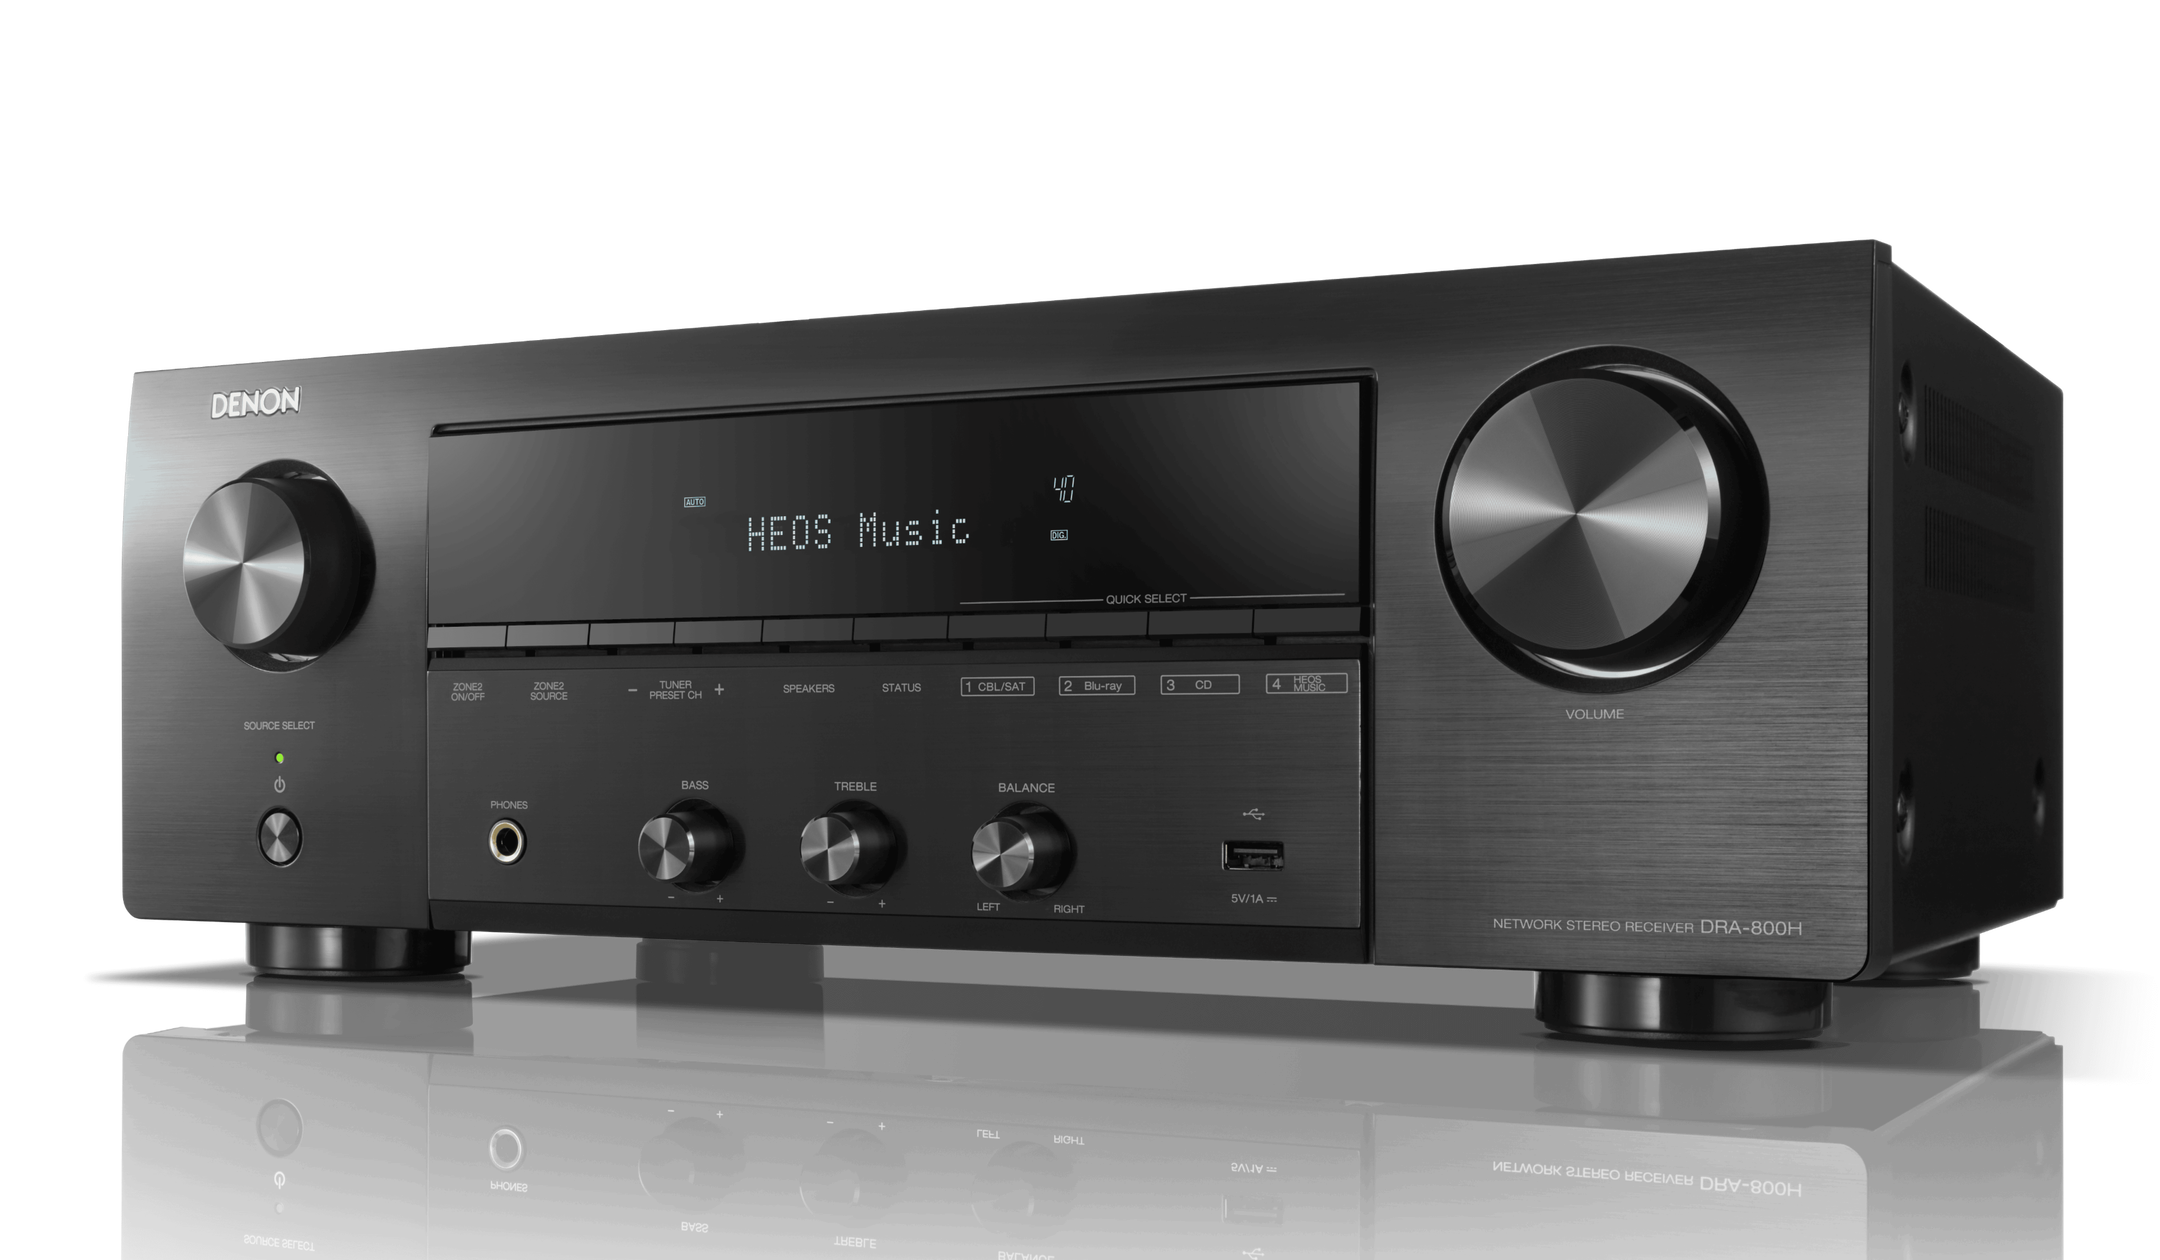 Denon　DRA-800H　Ch.　Refurbished　HEOS®　Receiver　US　2.2　100W　4K　AV　with　Built-in